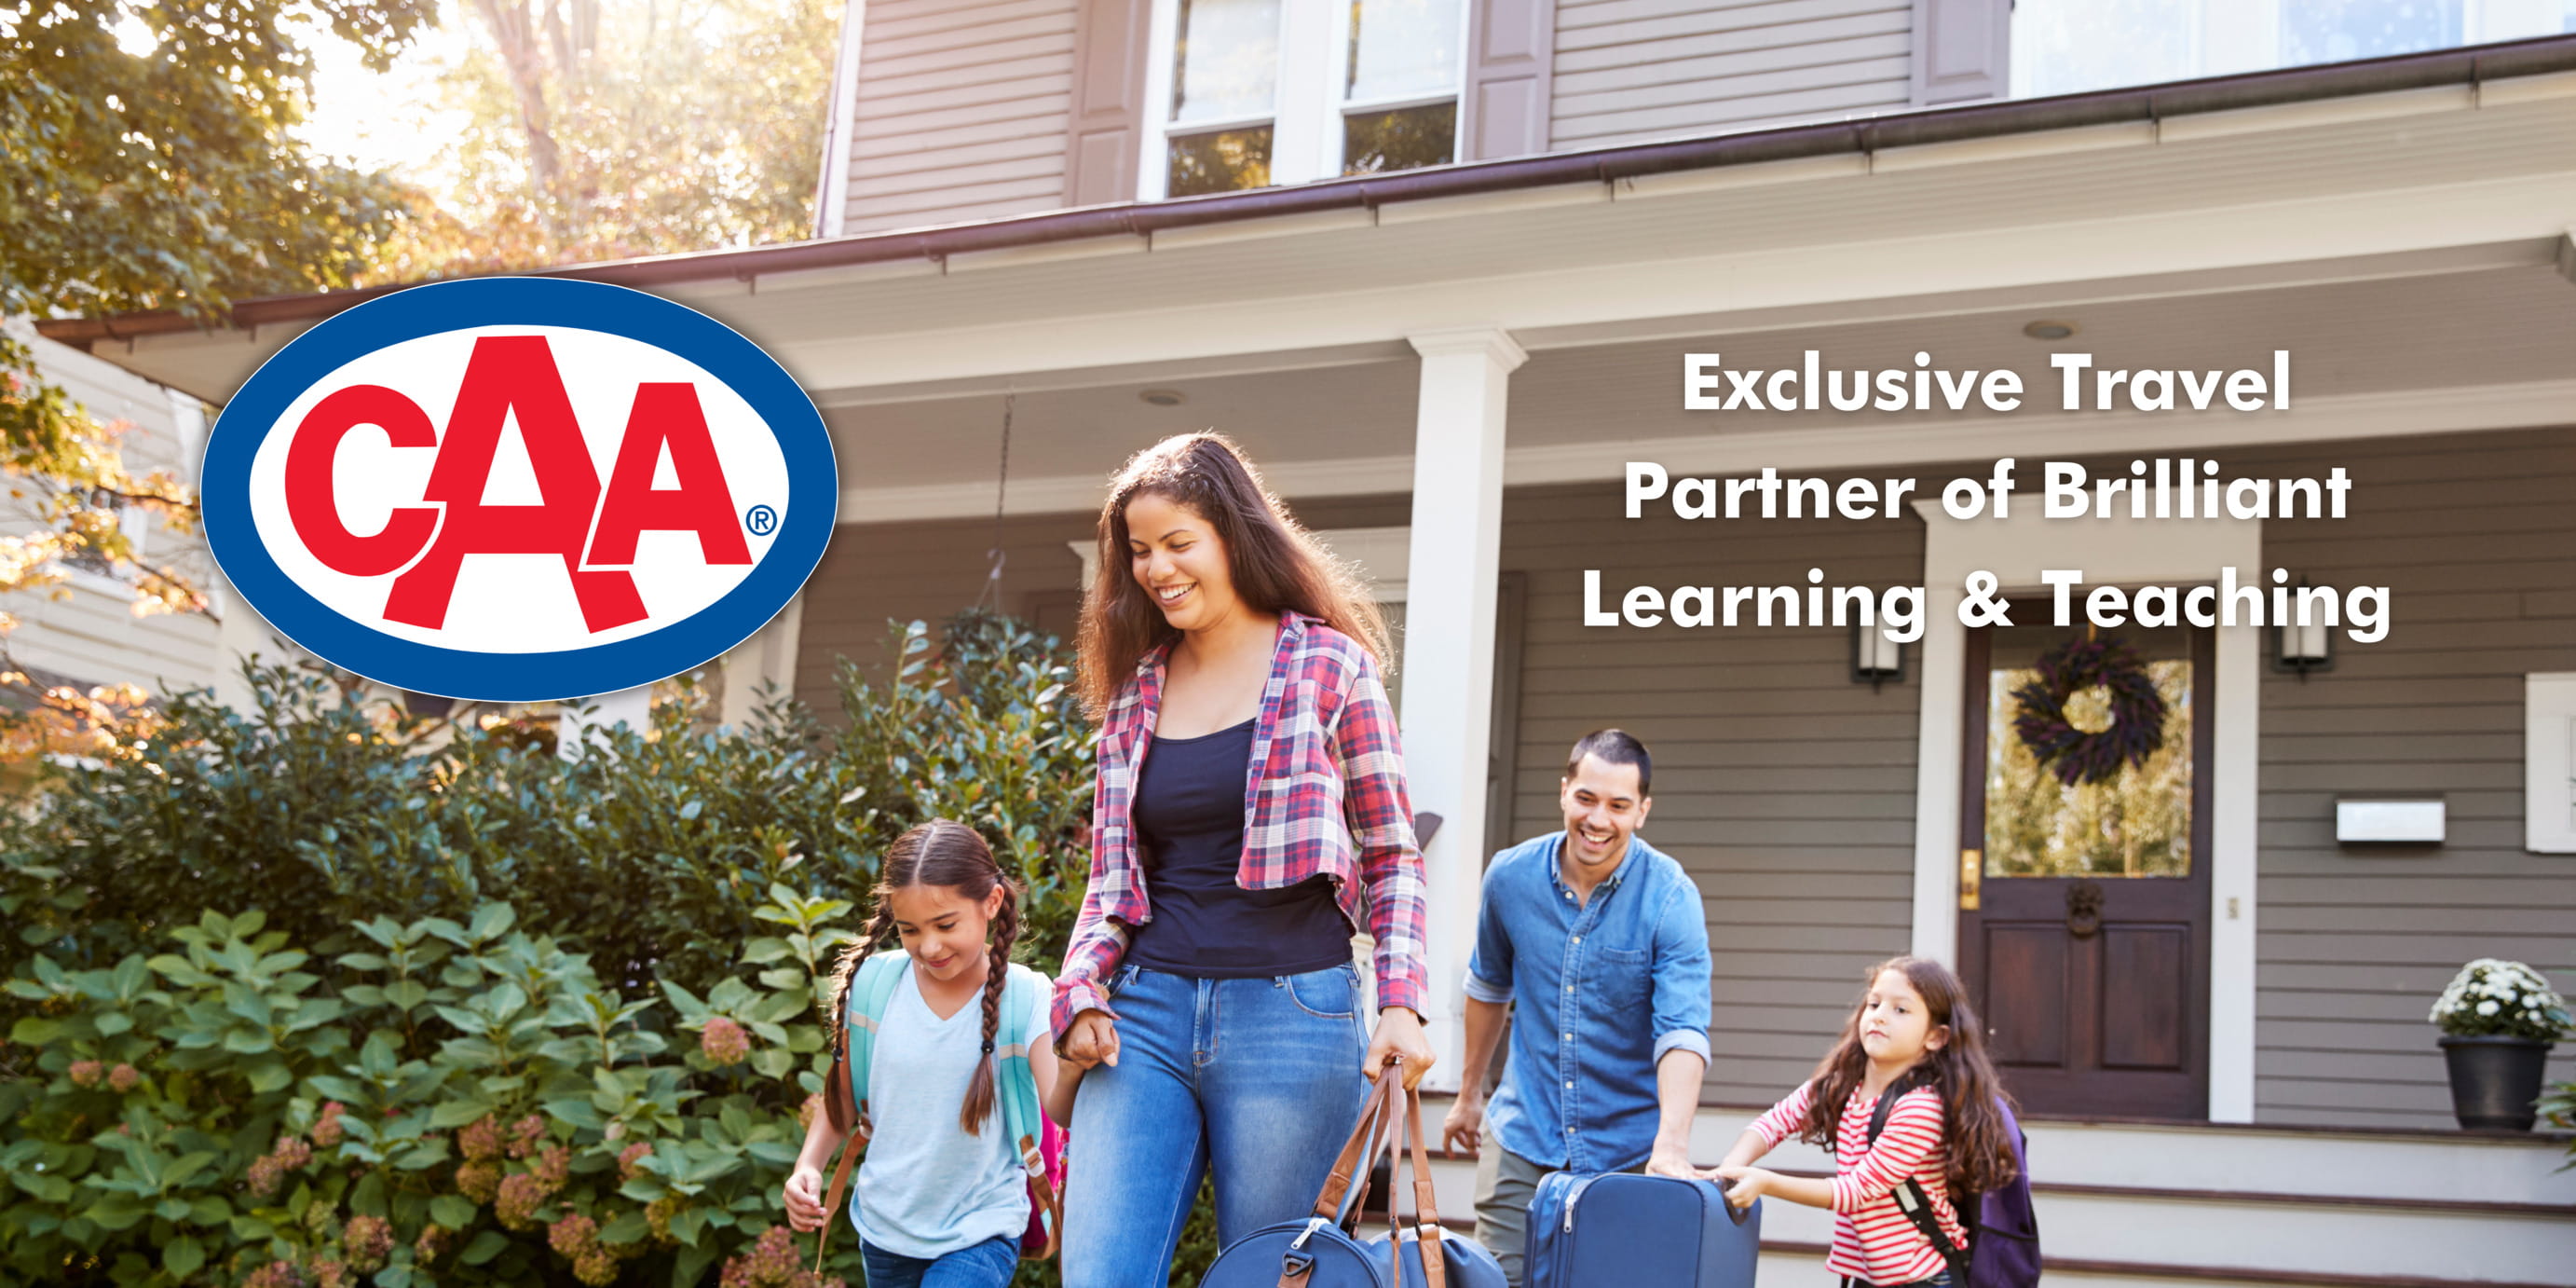 Sponsor banner for CAA, the official travel partner of the BL learning and teaching retreat!